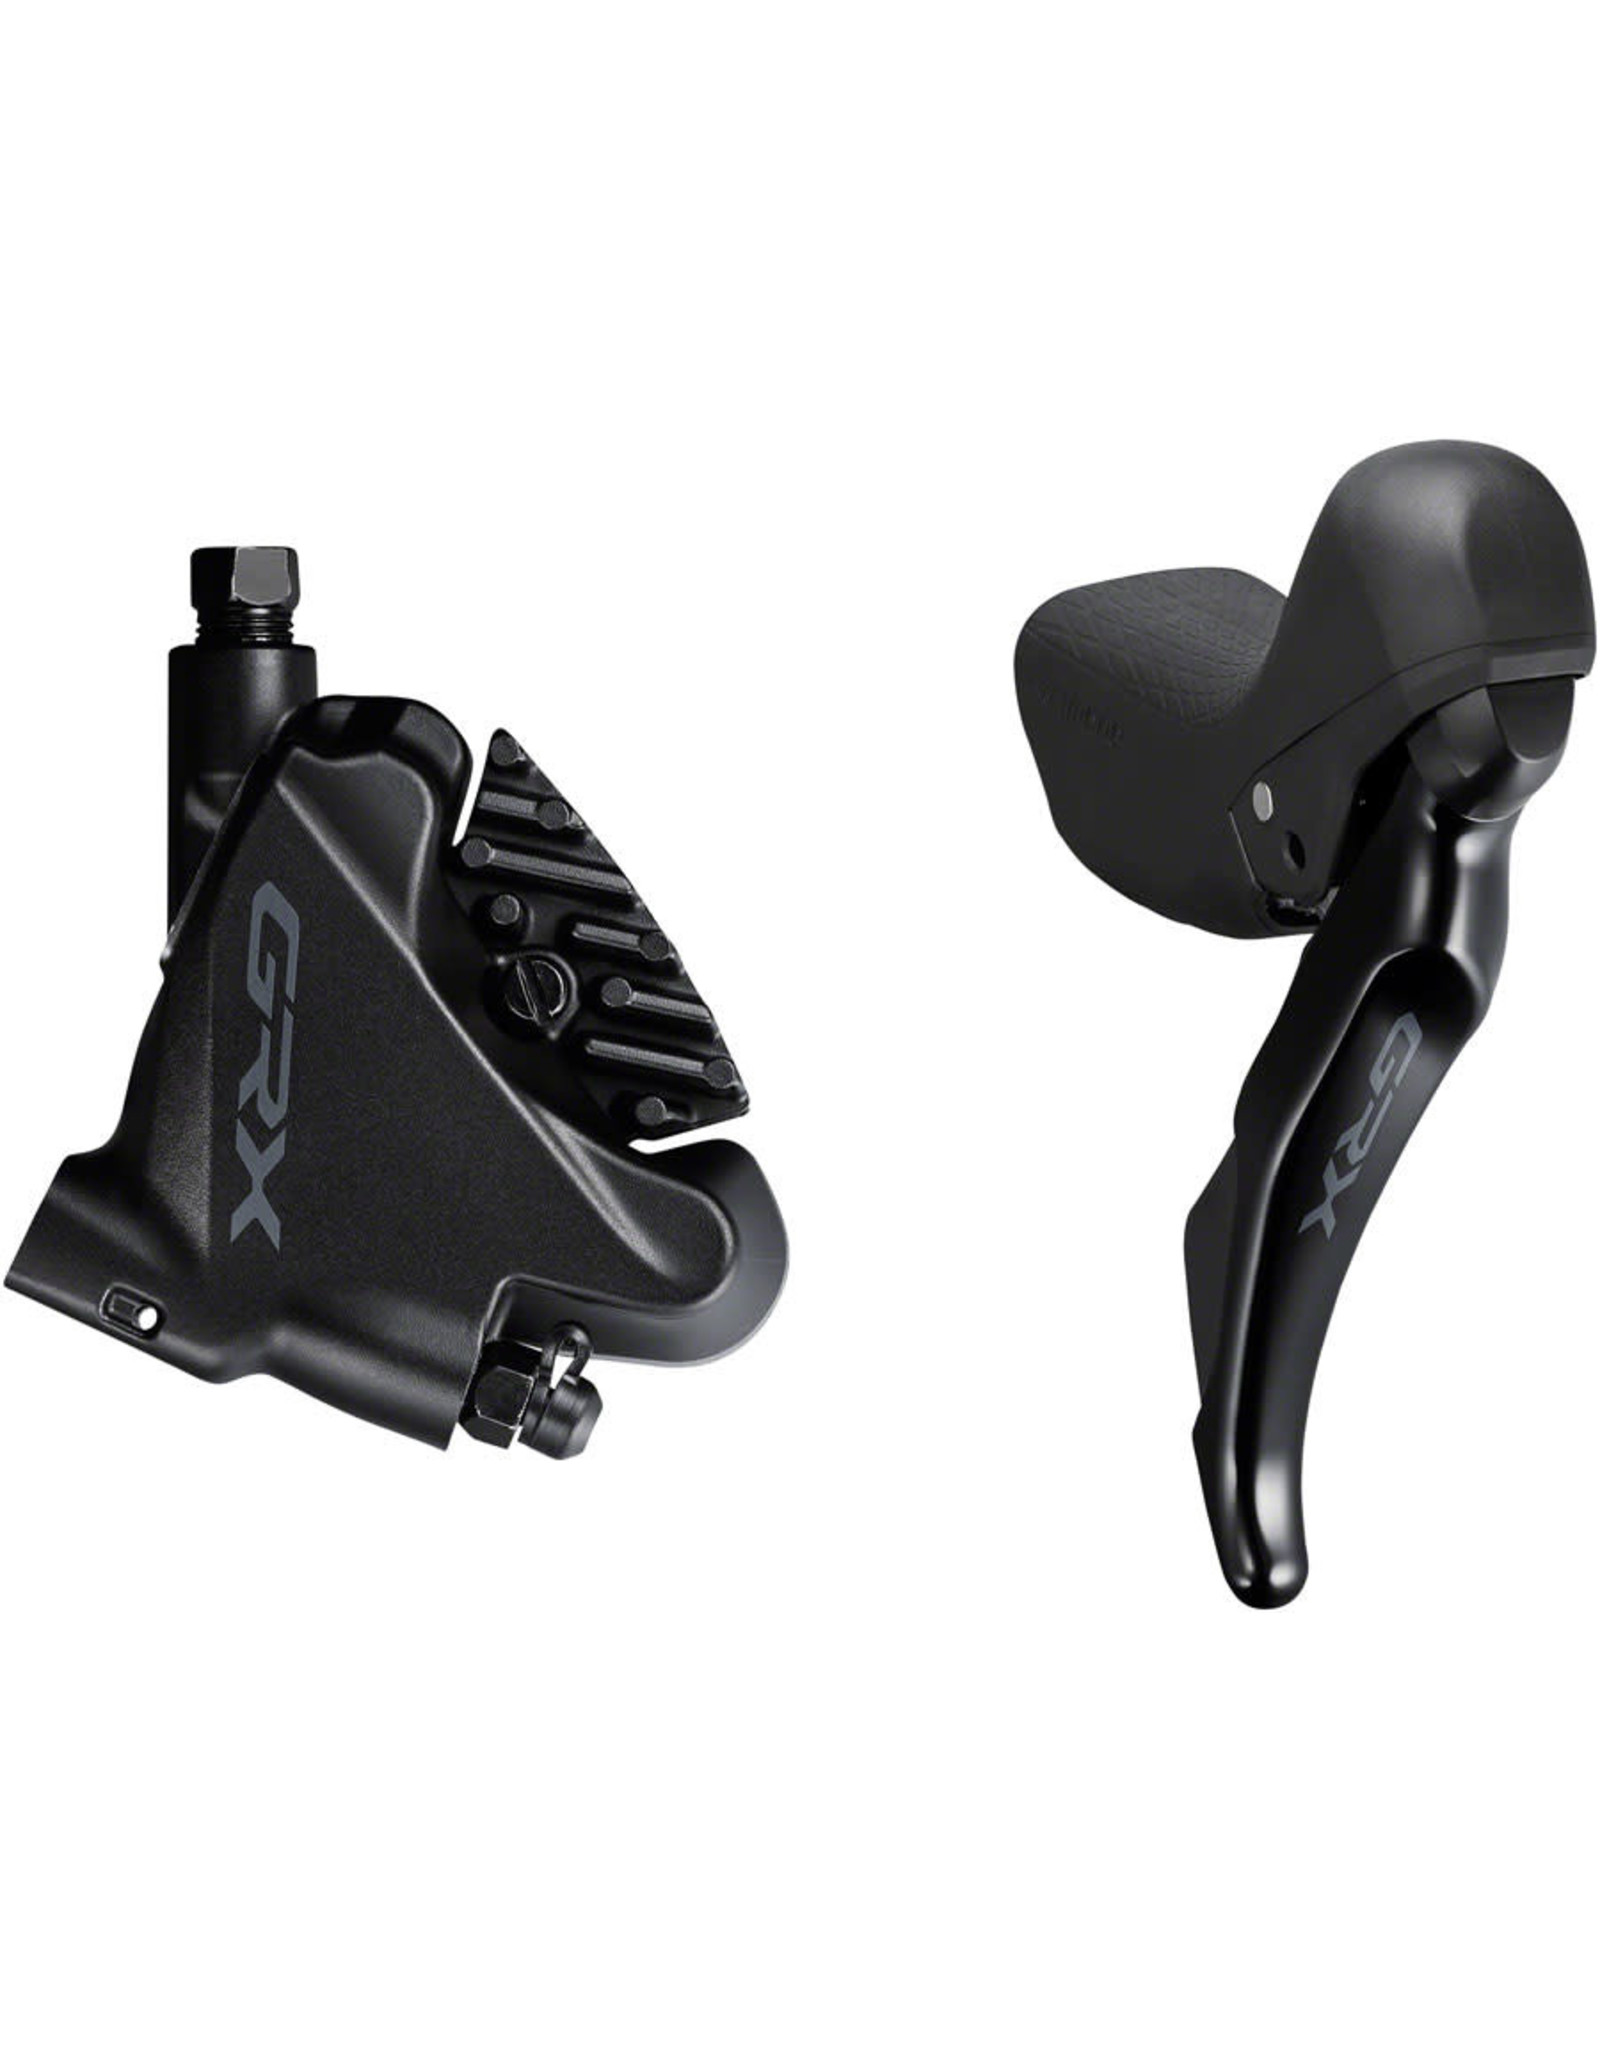 Shimano Shimano GRX ST-RX400/BR-RX400 Hydraulic Disc Brake and Brake/Shift Lever - Right, 10-Speed, Flat Mount, Finned Resin Pads, Black